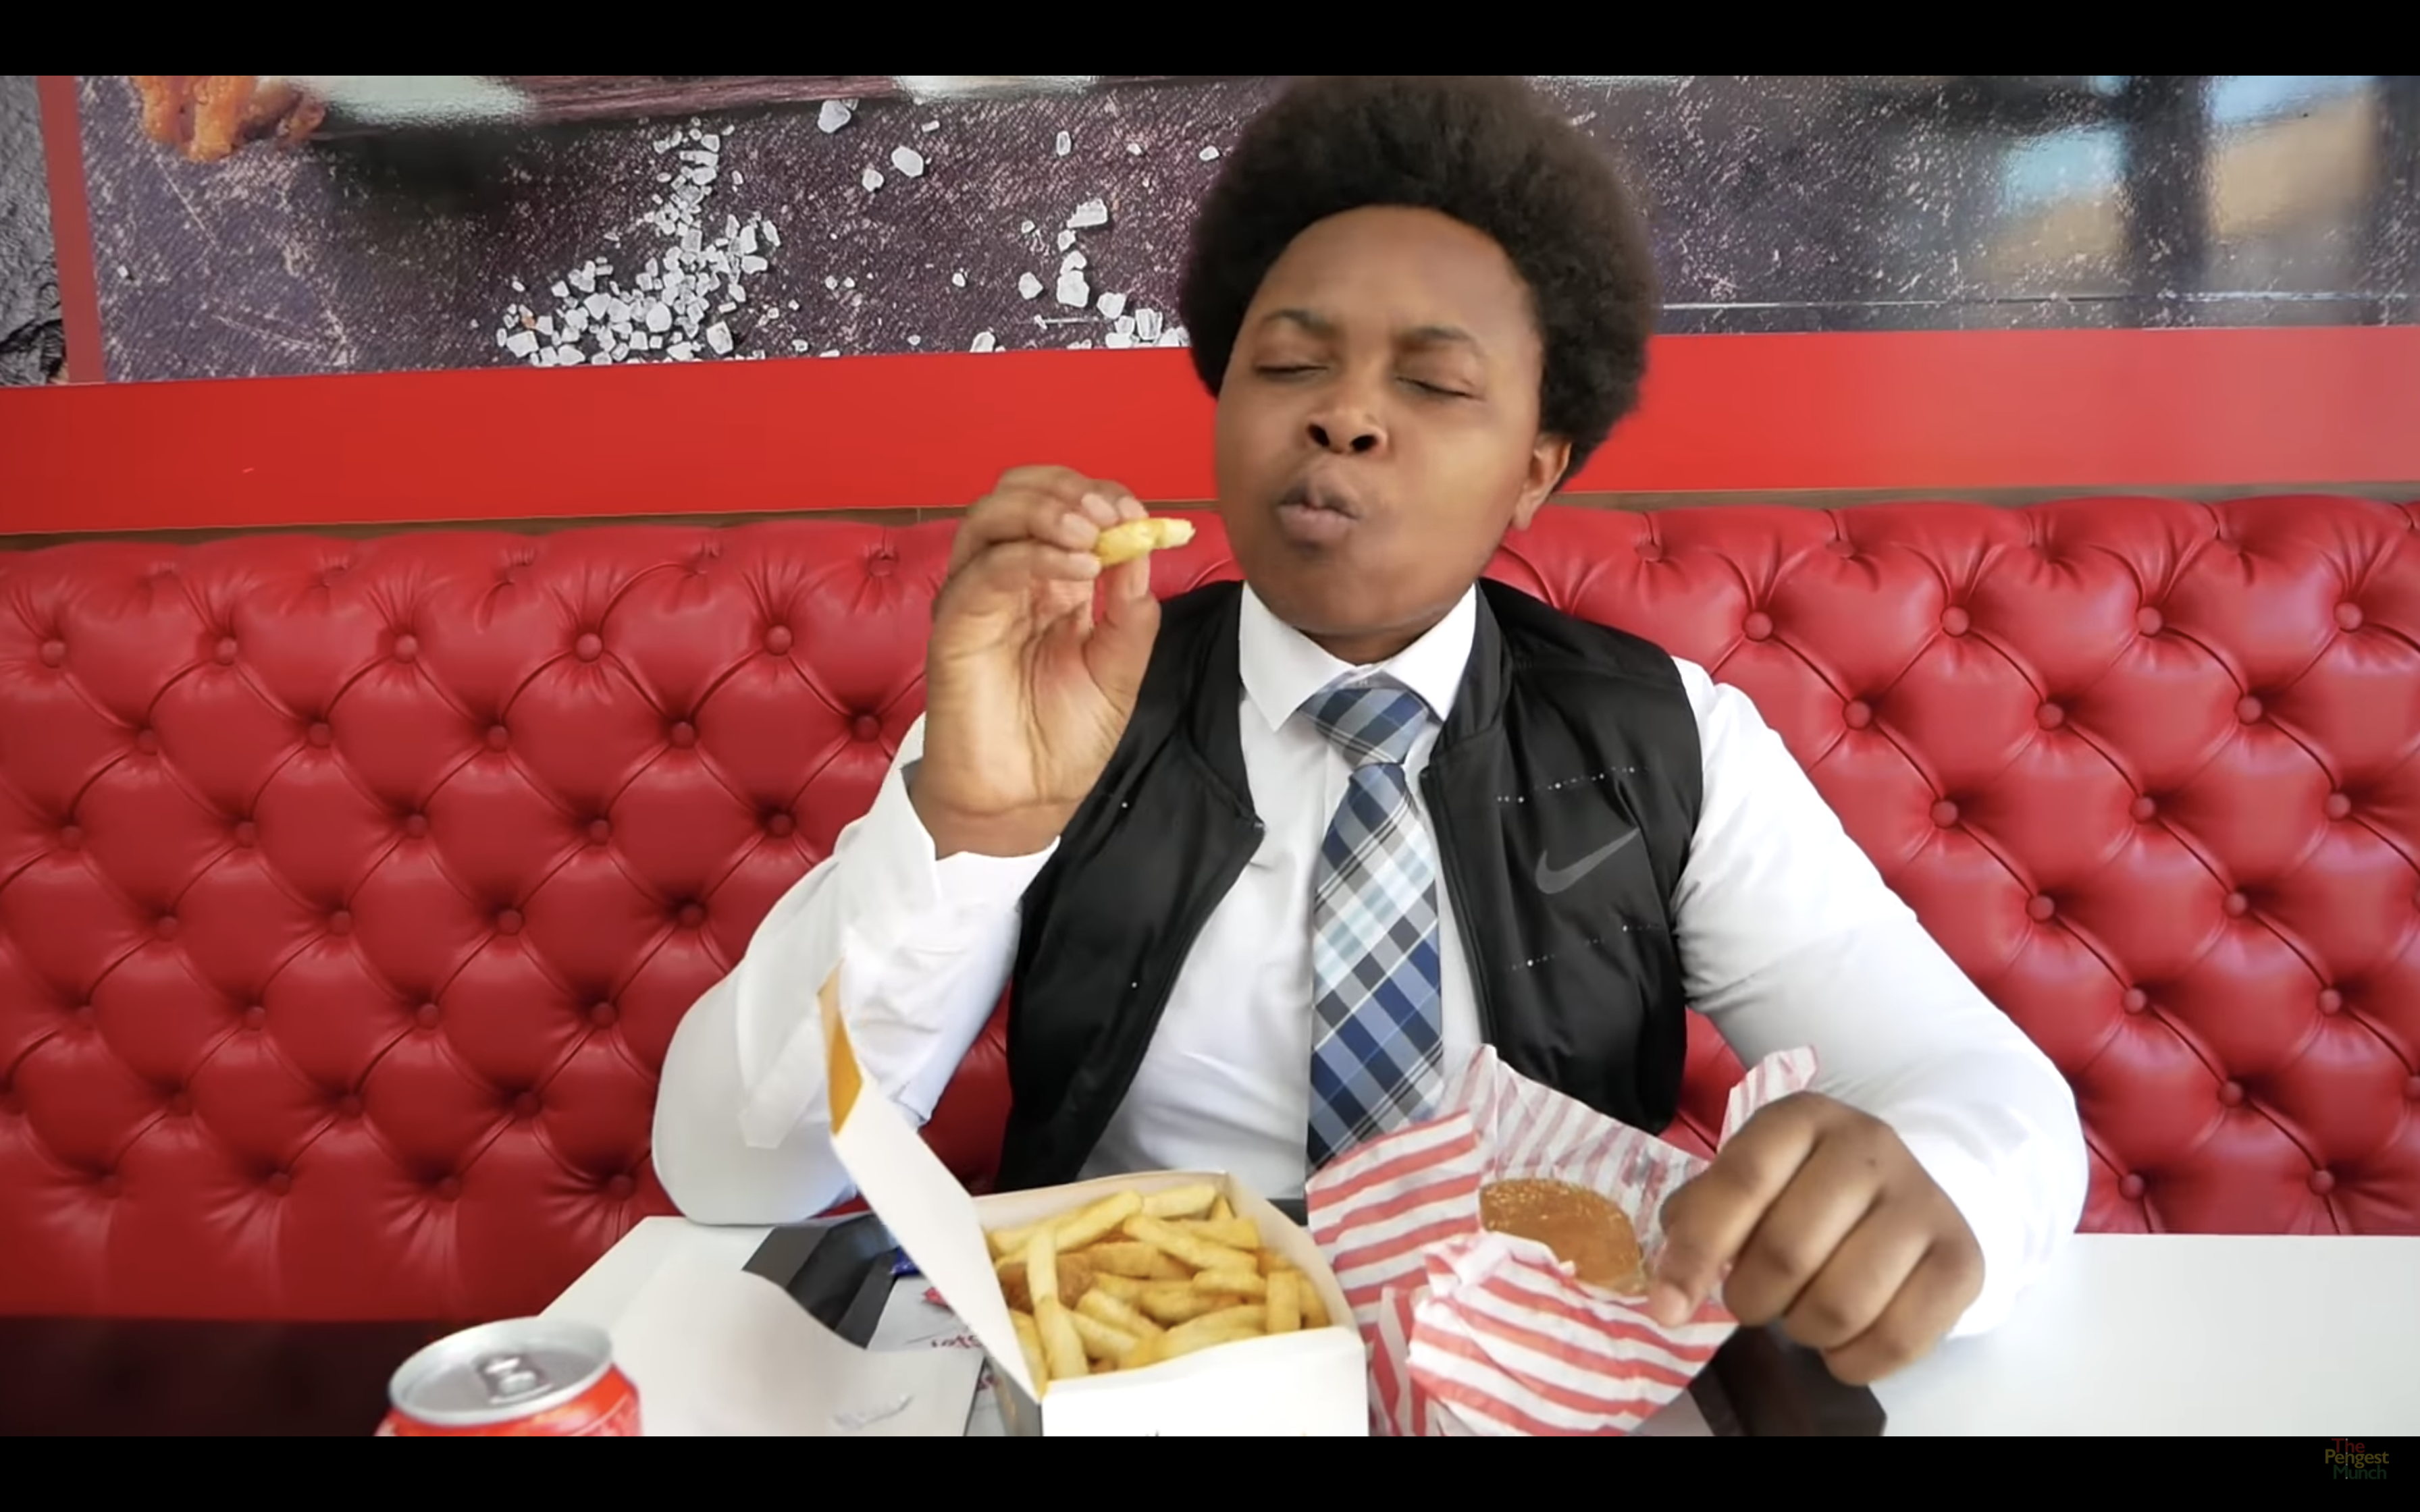 The Chicken Connoisseur, Elijah Quashie, closes his eyes in ecstasy at some outstanding chips on The Pengest Munch